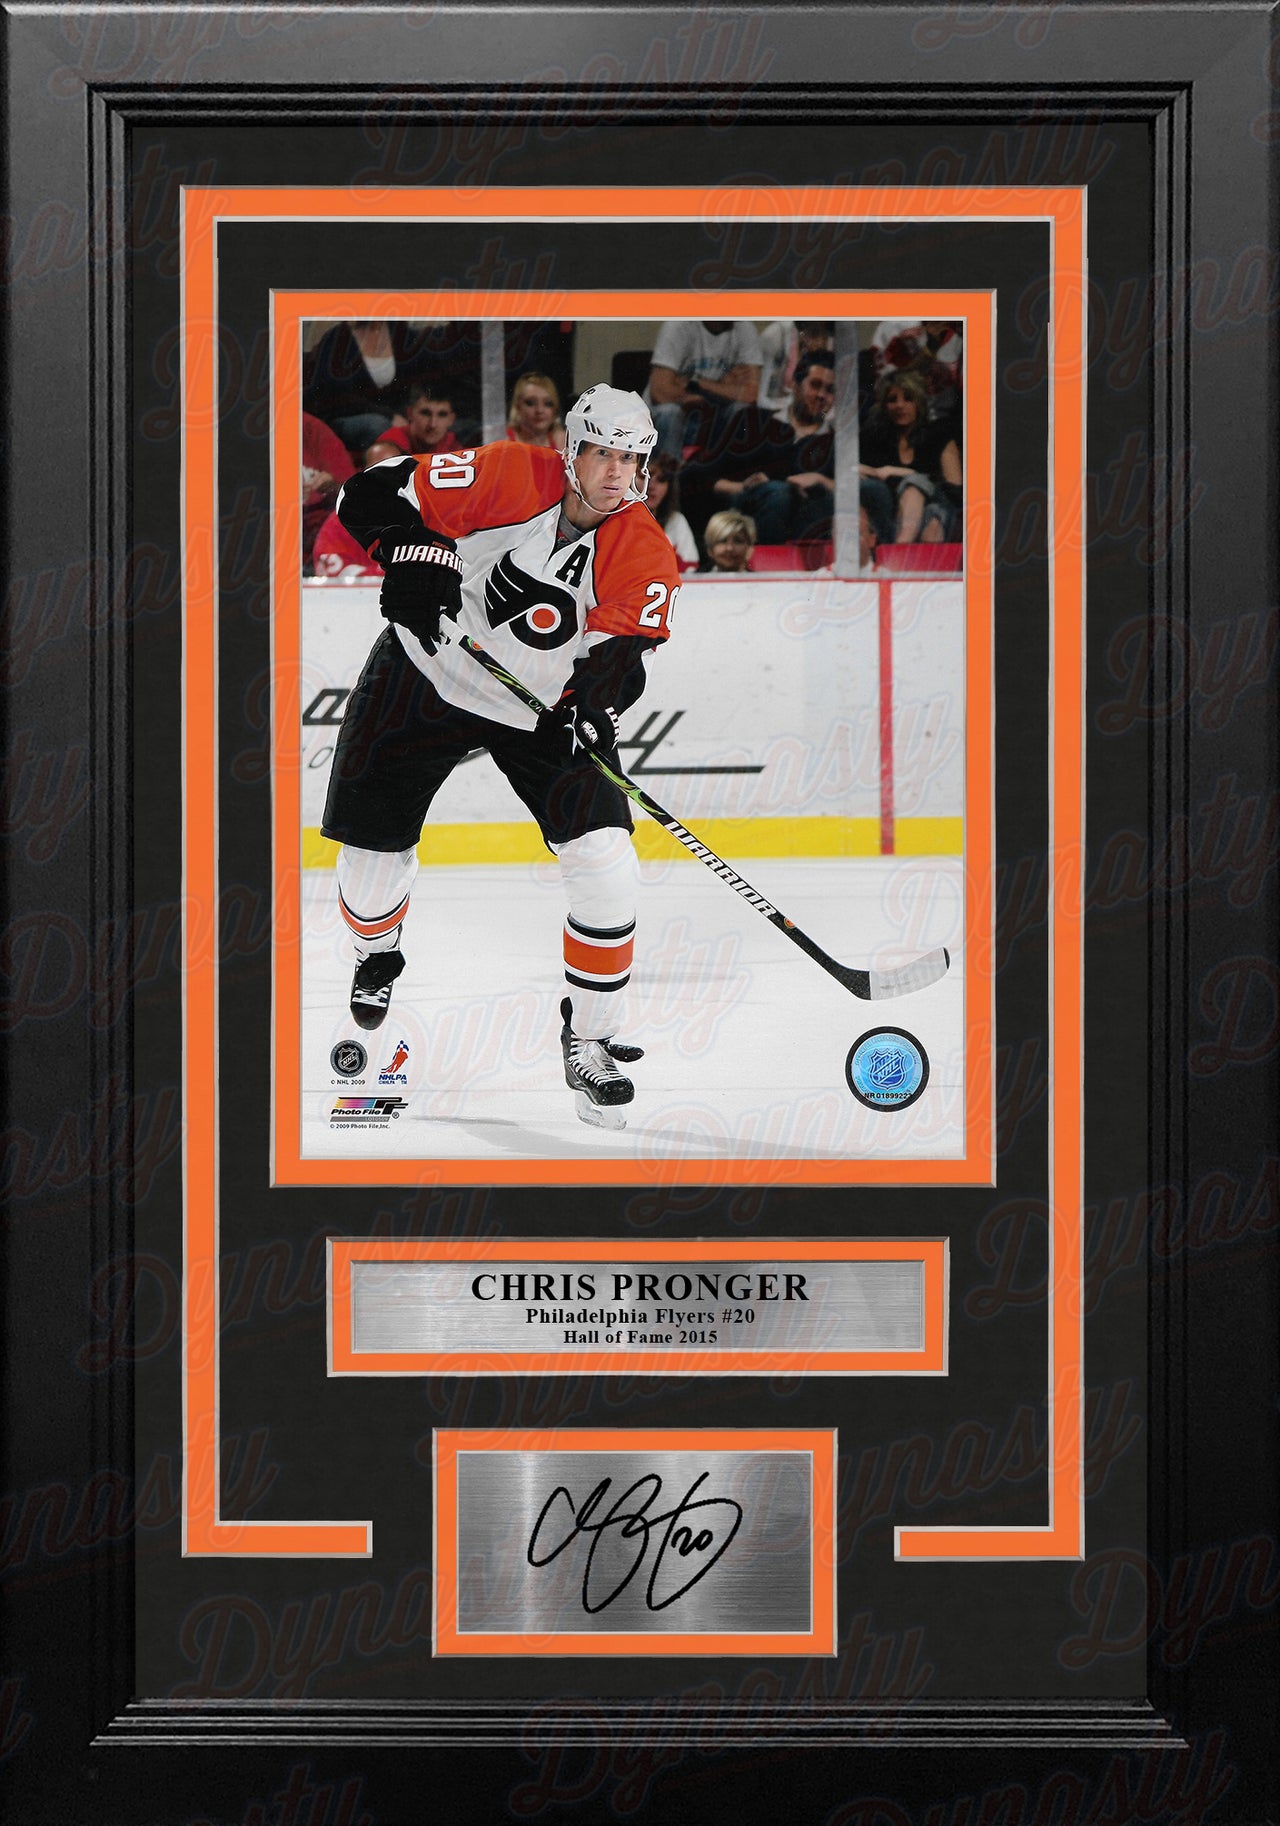 Chris Pronger in Action Philadelphia Flyers 8" x 10" Framed Hockey Photo with Engraved Autograph - Dynasty Sports & Framing 